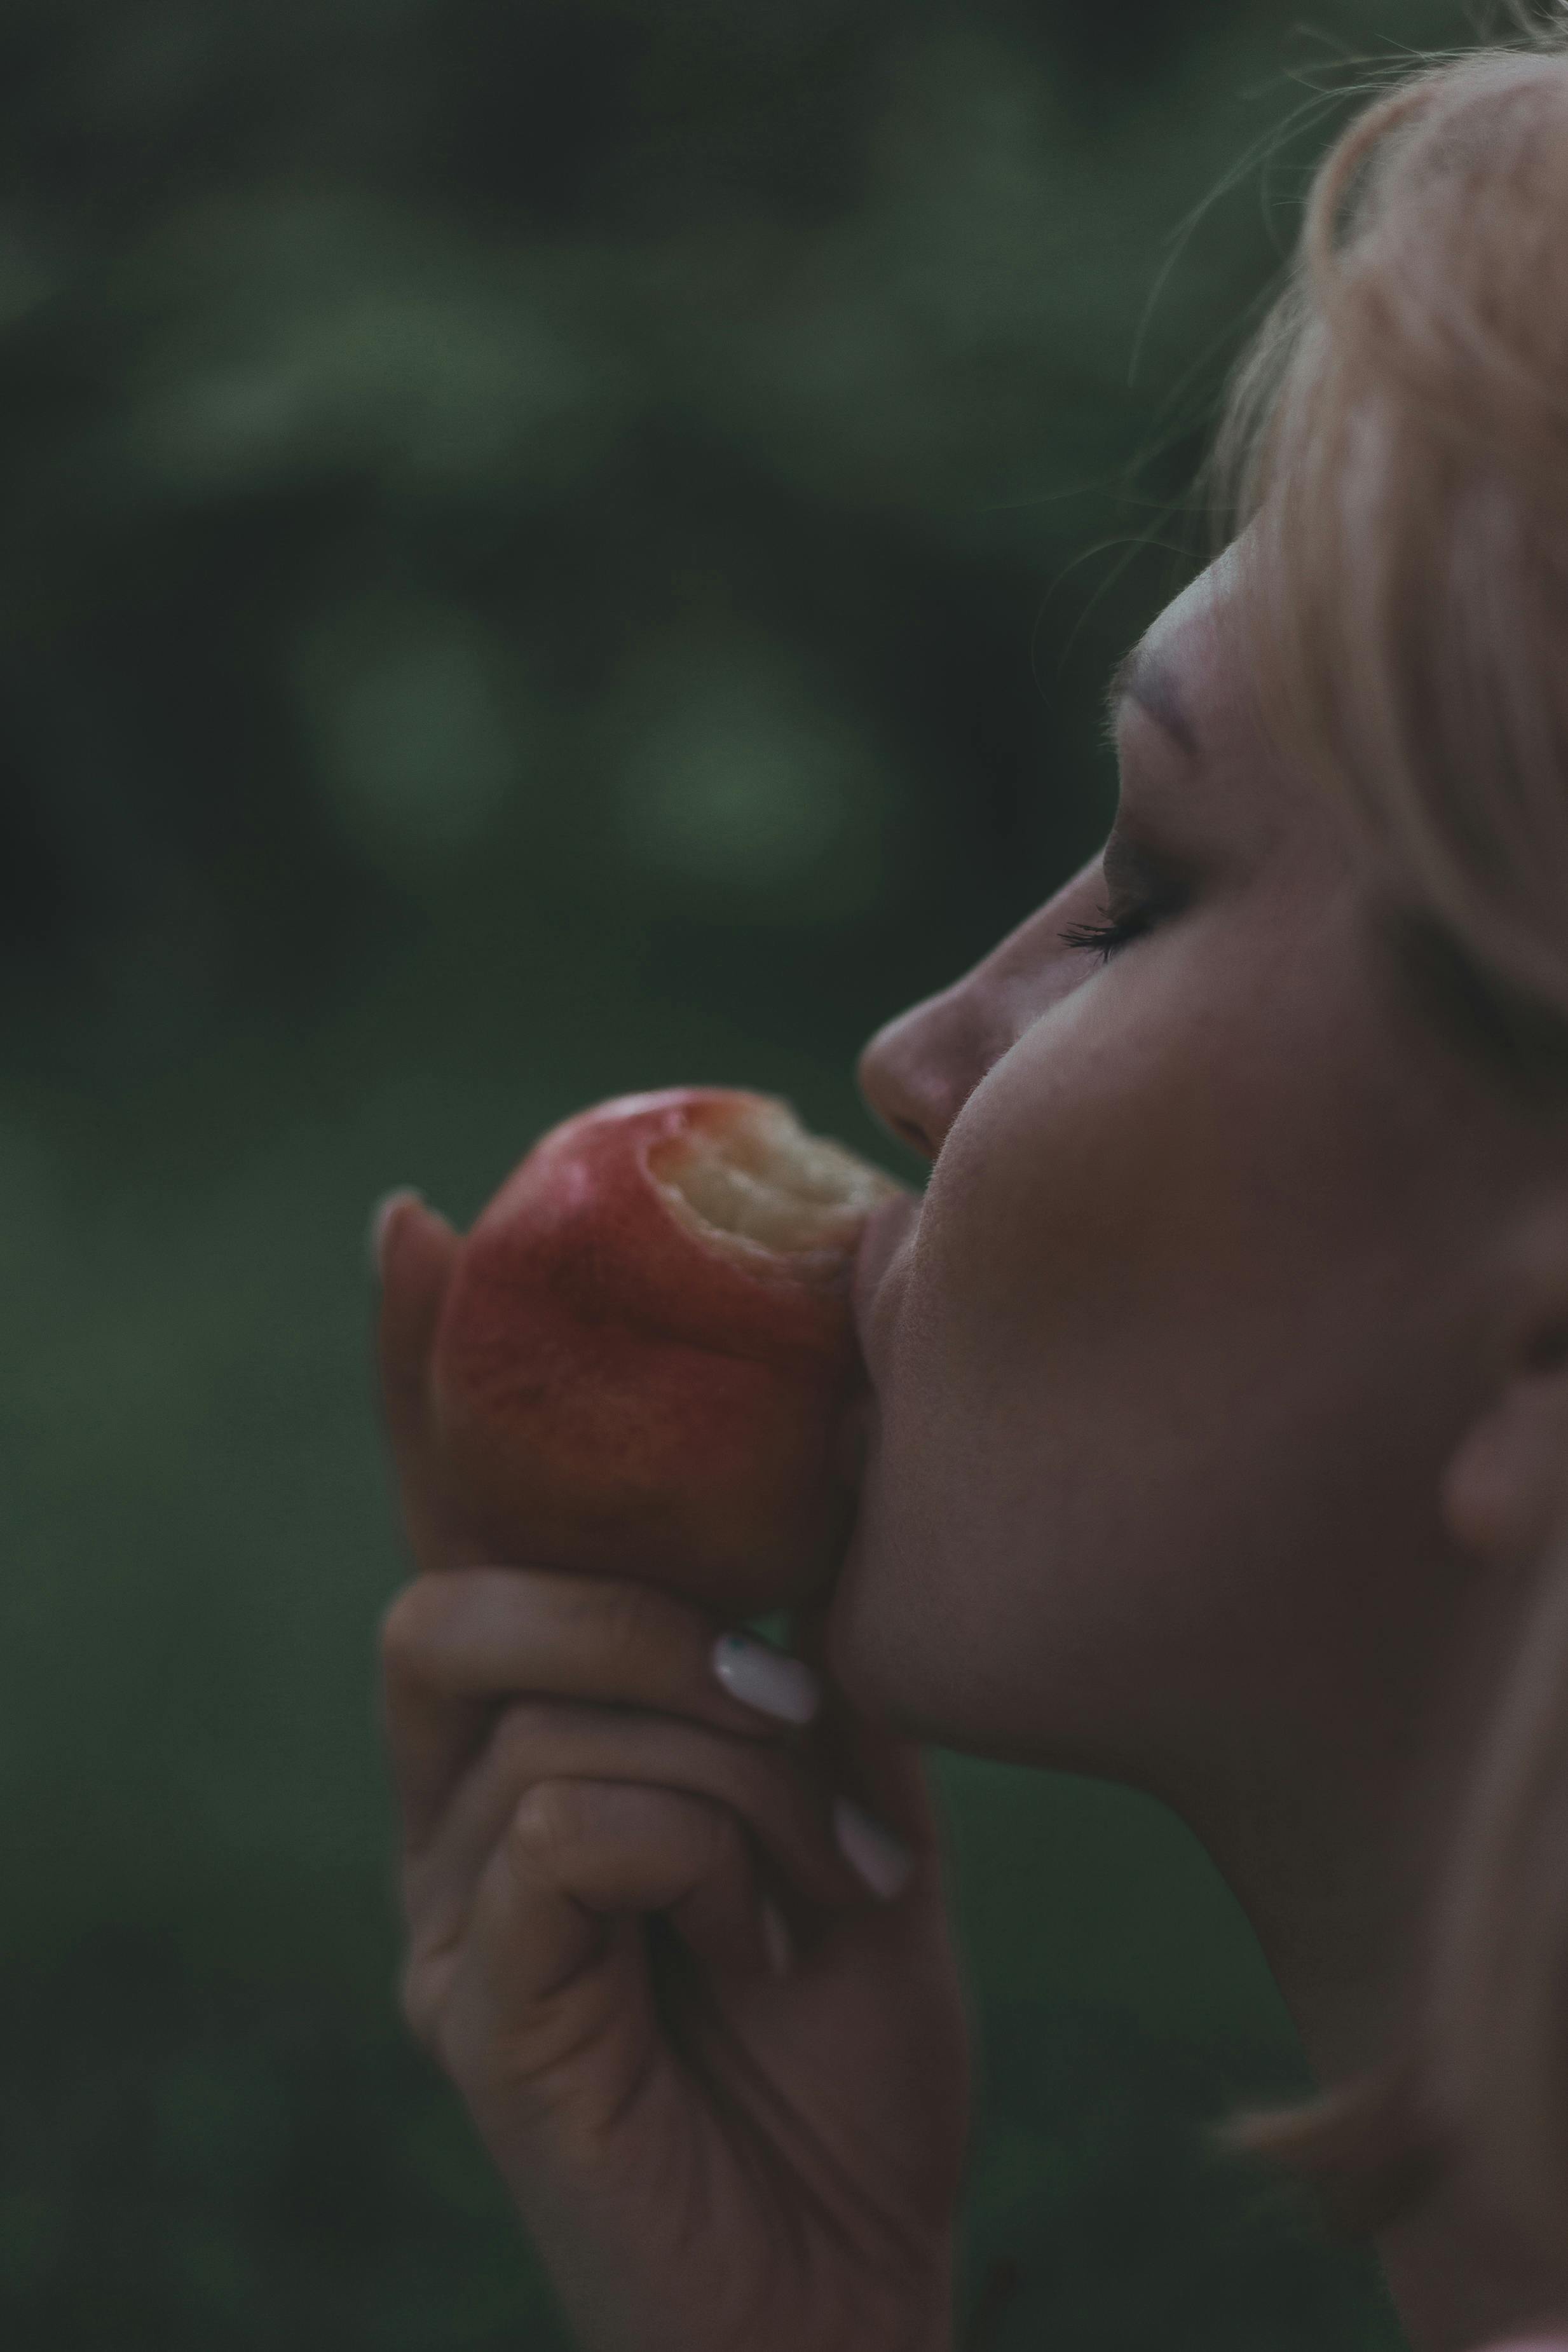 humans eating an apple